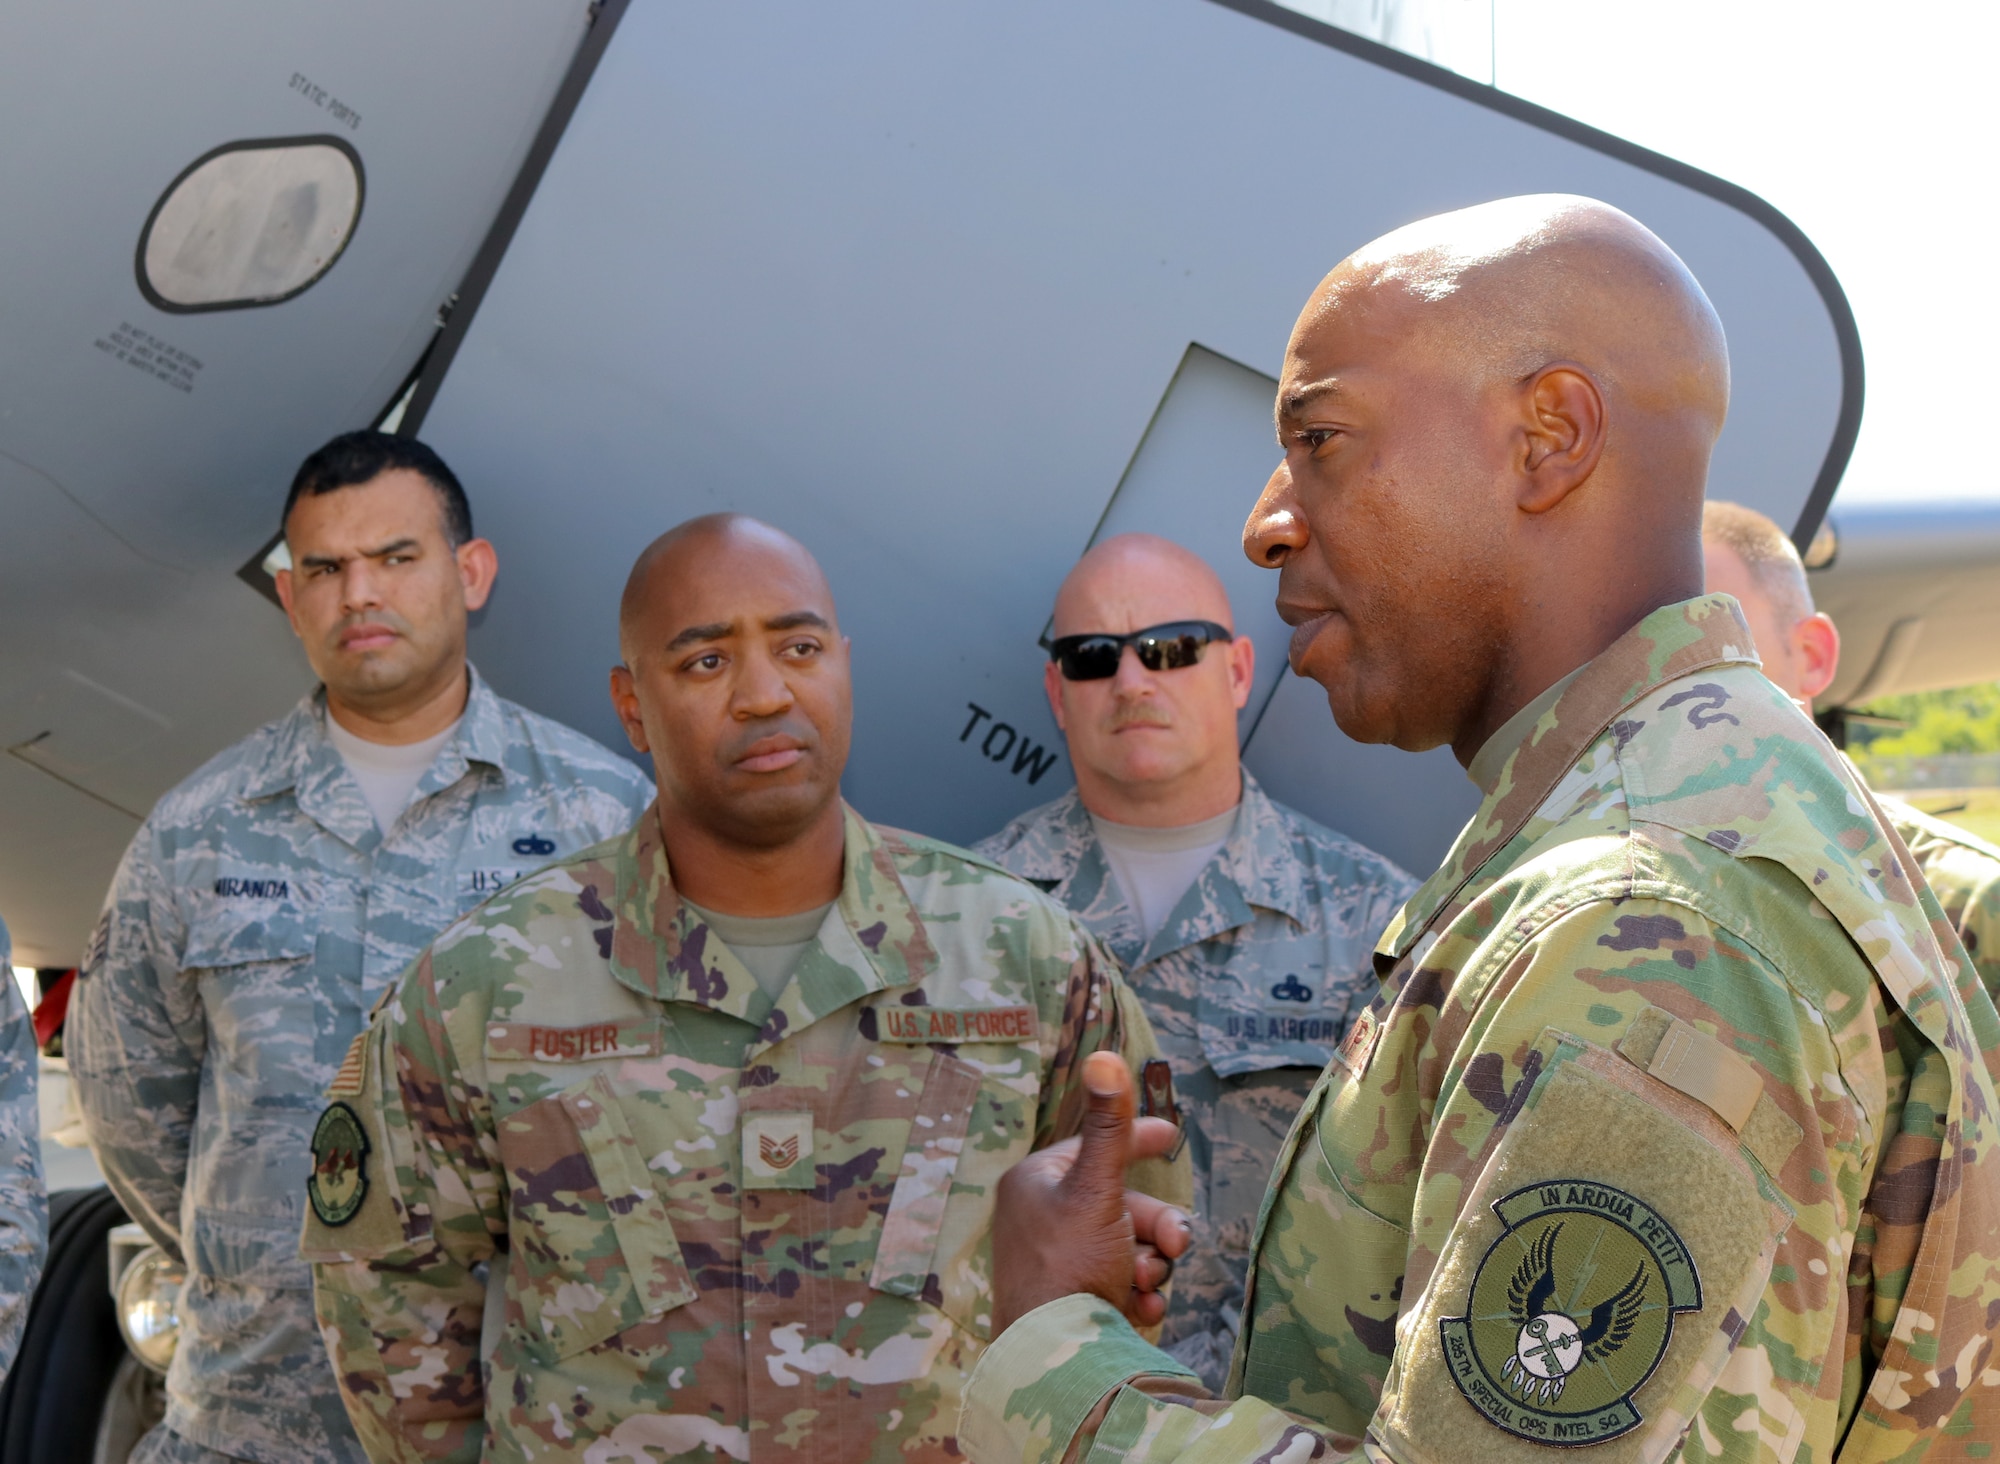 Chief Master Sgt. of the Air Force Kaleth O. Wright visits the 507th Air Refueling Wing, July 31, 2019 at Tinker Air Force Base, Oklahoma. Wright met with wing leadership to discuss total force integration as well as to meet the Airman of the 507th ARW. (U.S. Air Force photo by Senior Airman Mary Begy)